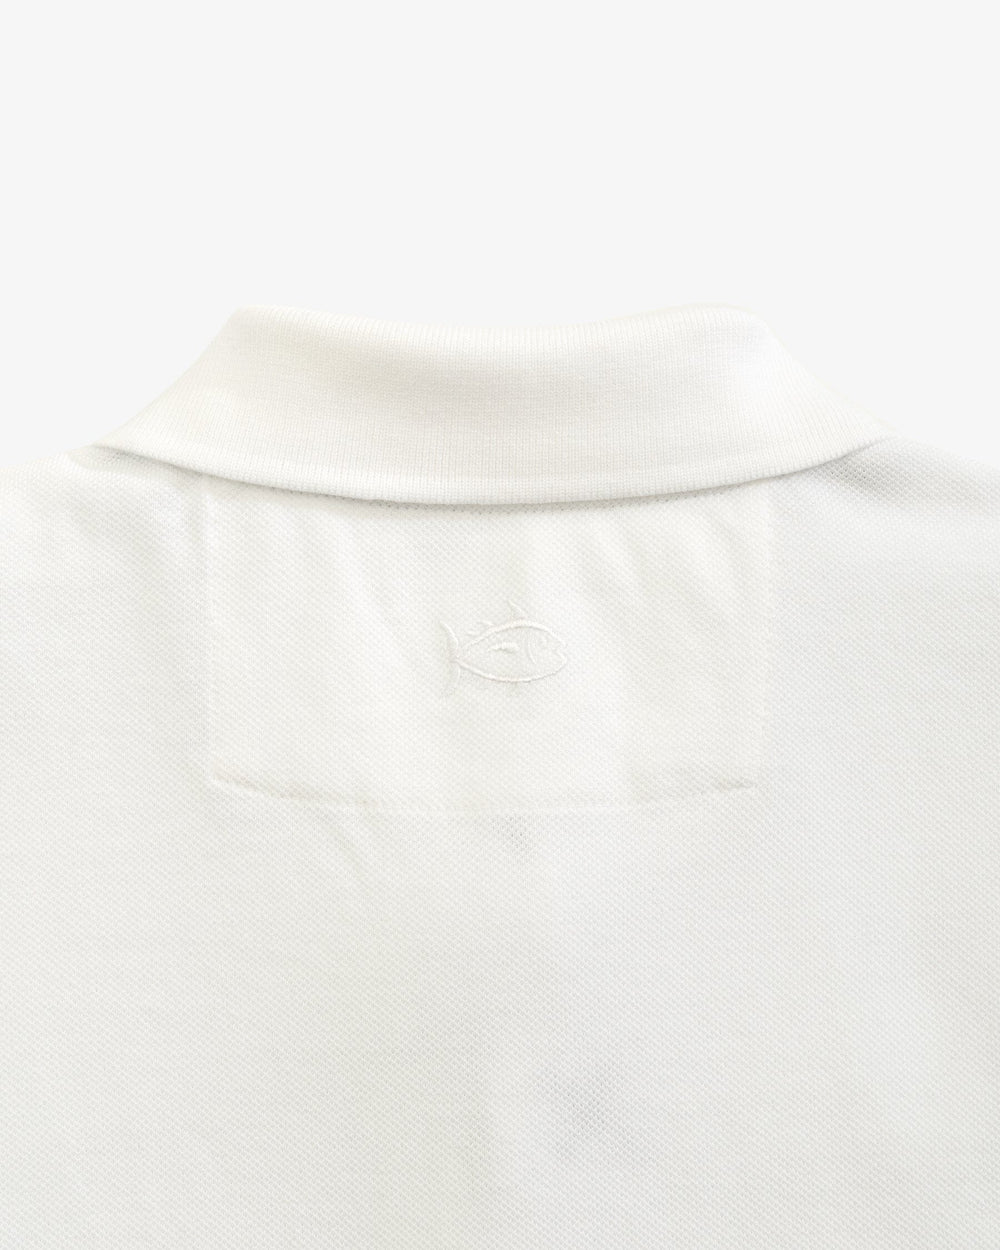 The yoke view of the Georgia Southern Eagles Skipjack Polo by Southern Tide - Classic White